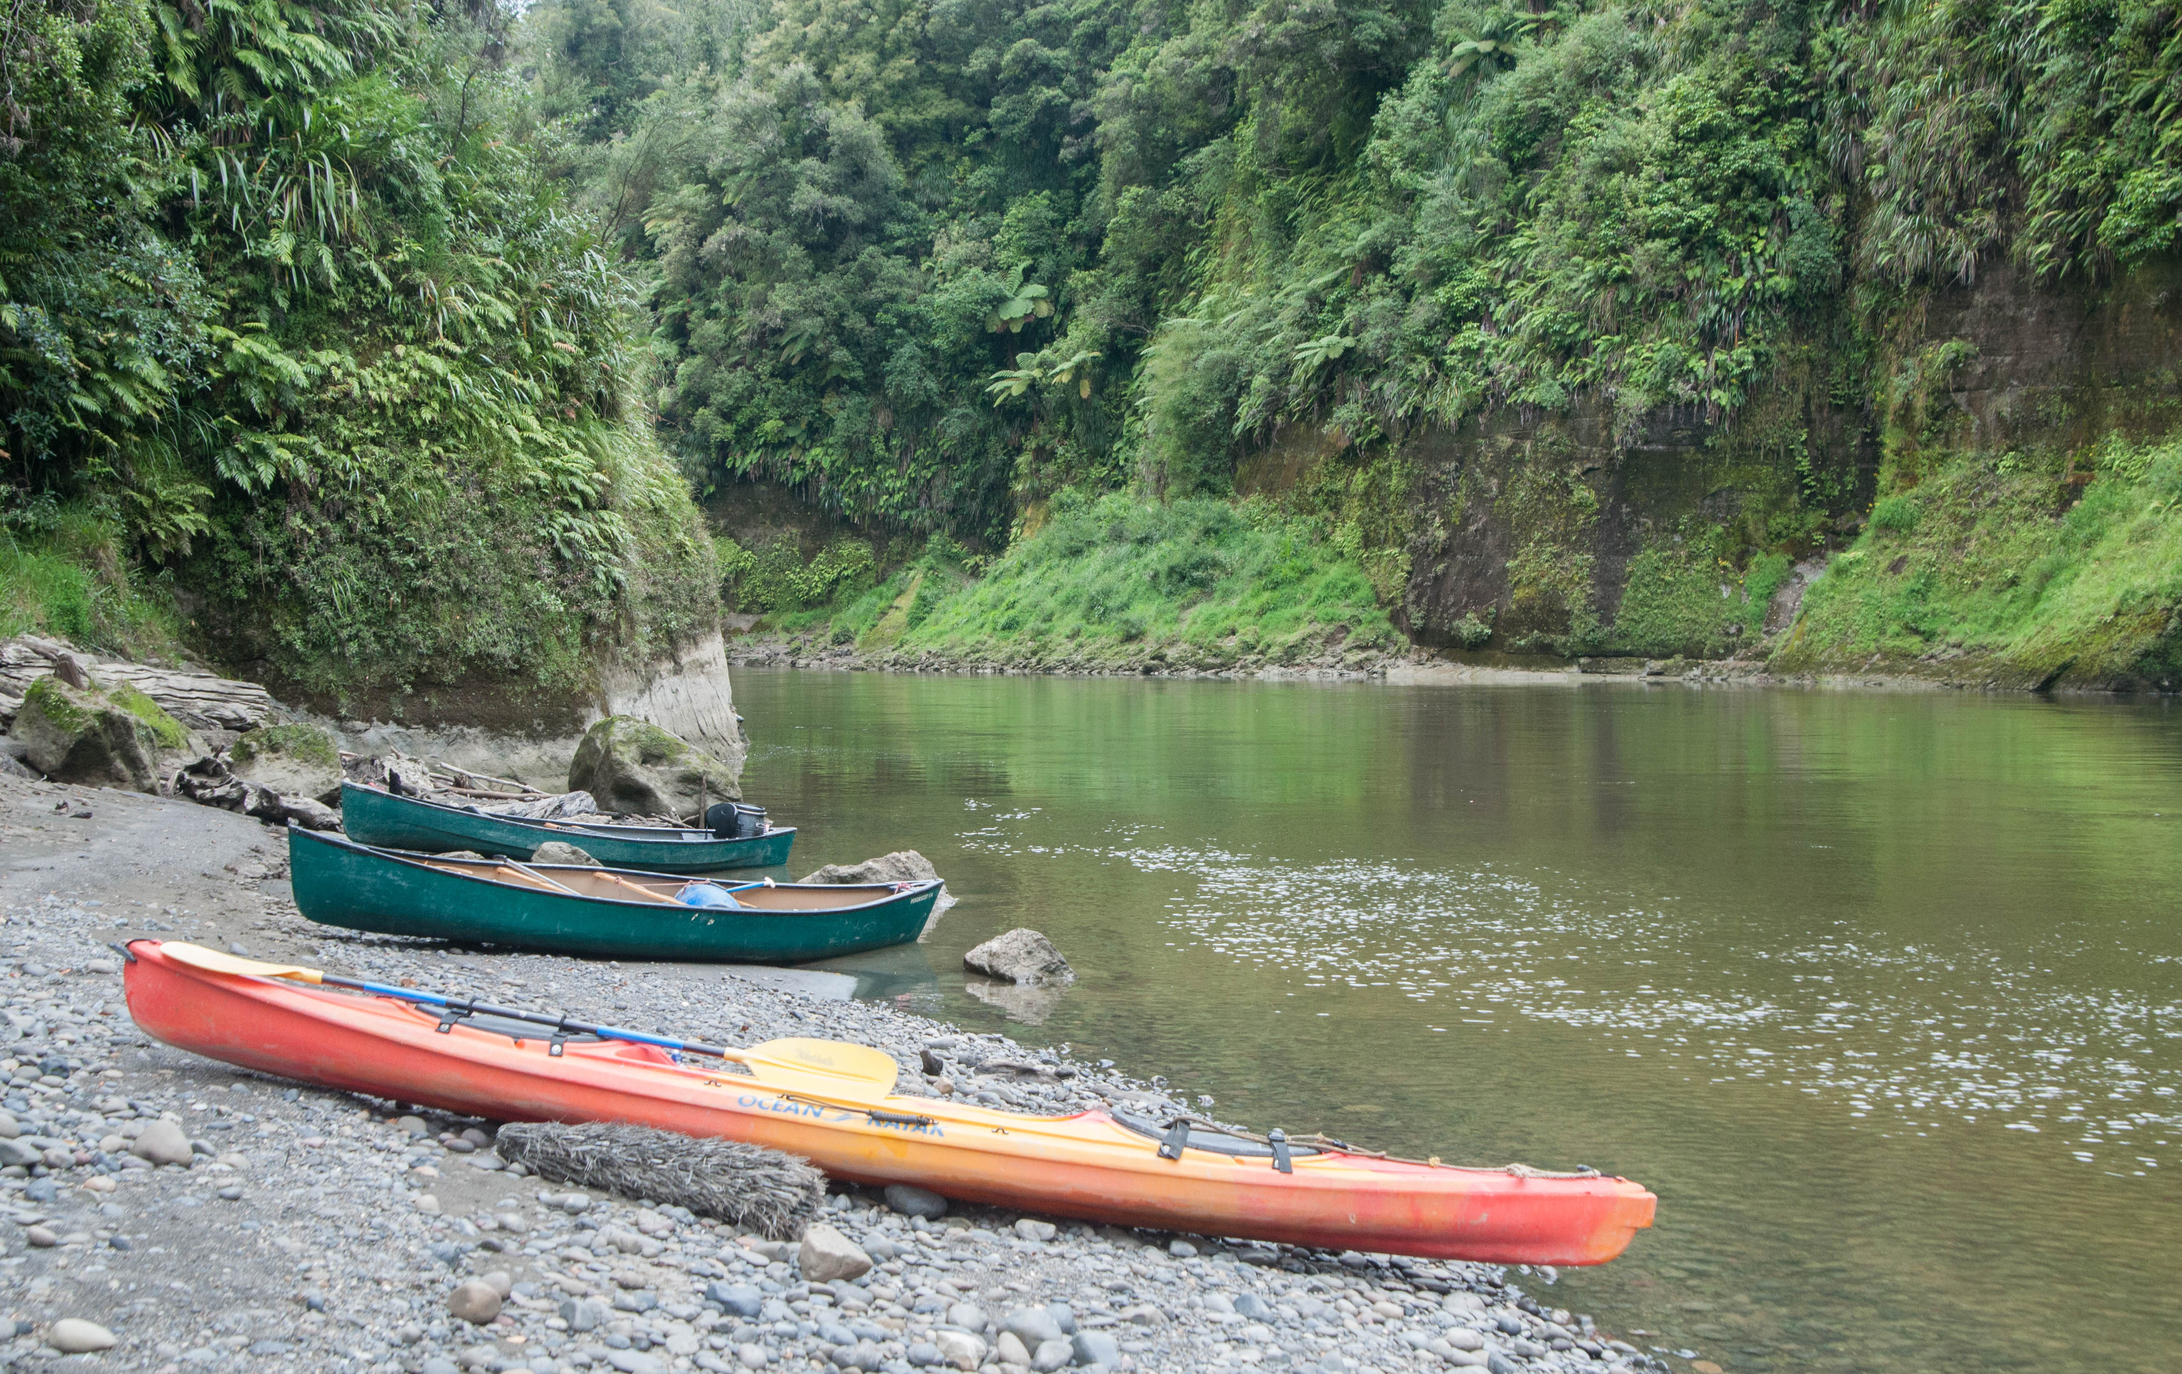 Kayaks are seen along the Whanganui River in Whanganui National Park, New Zealand. (Dreamstime/Blagov58)